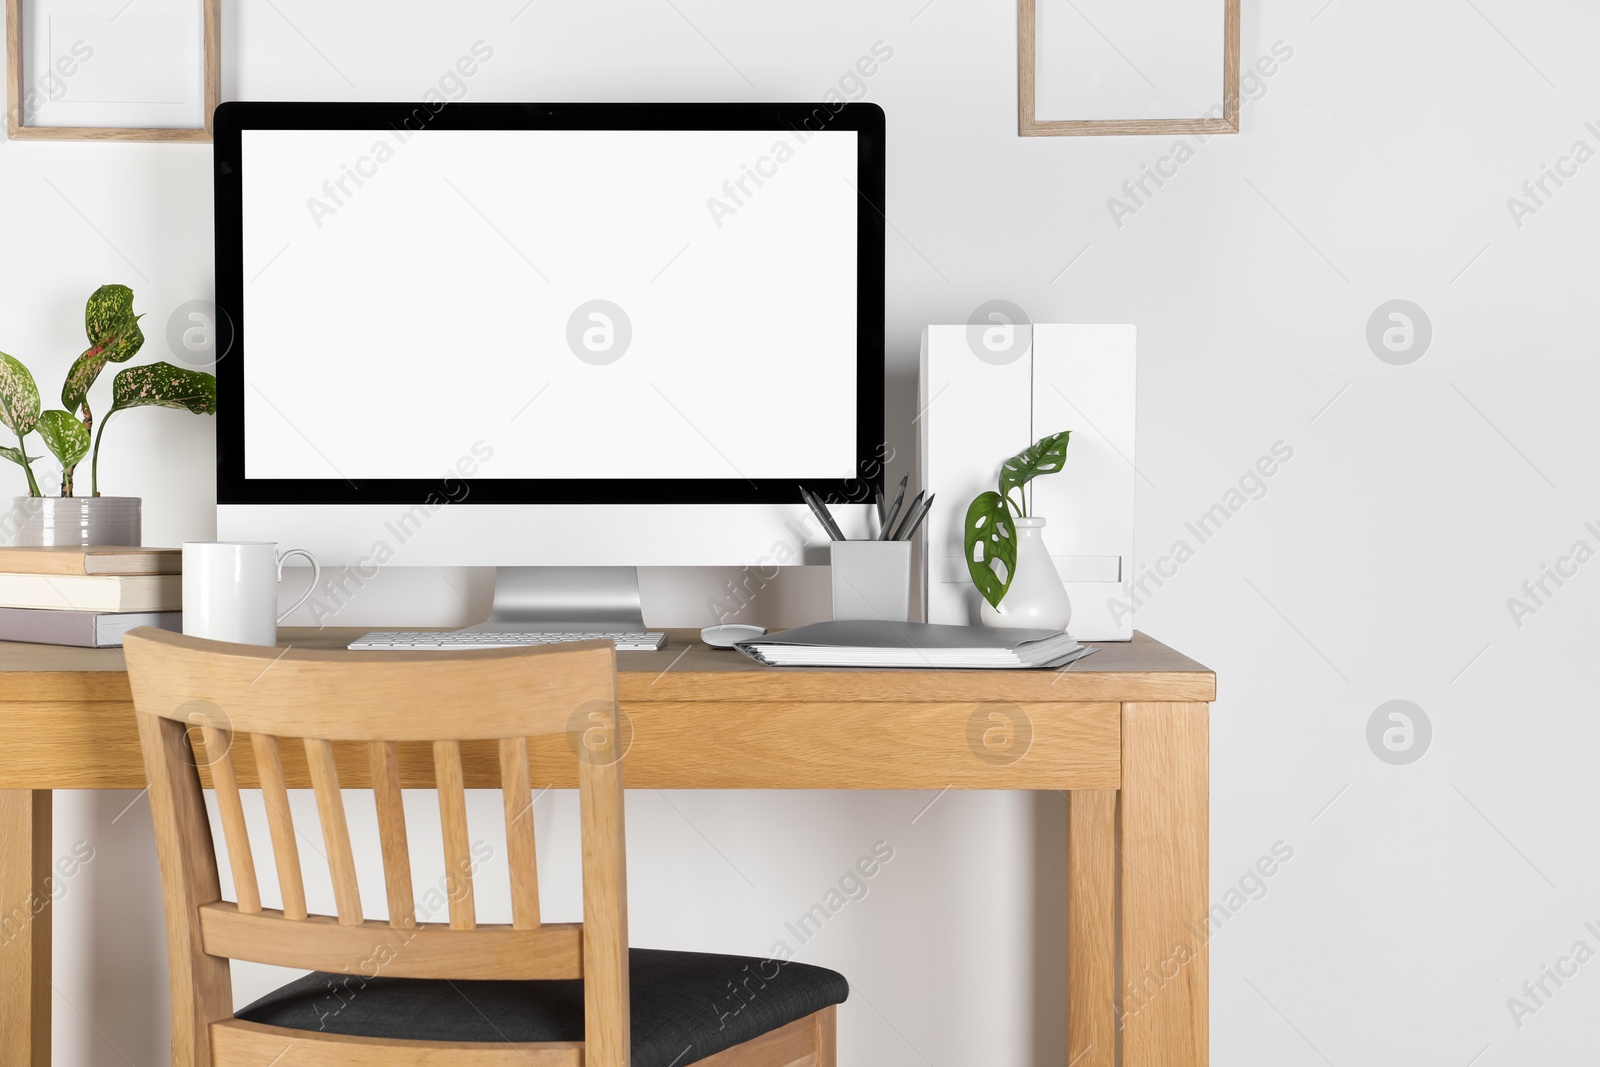 Photo of Home workplace. Computer, stationery and houseplants on wooden desk